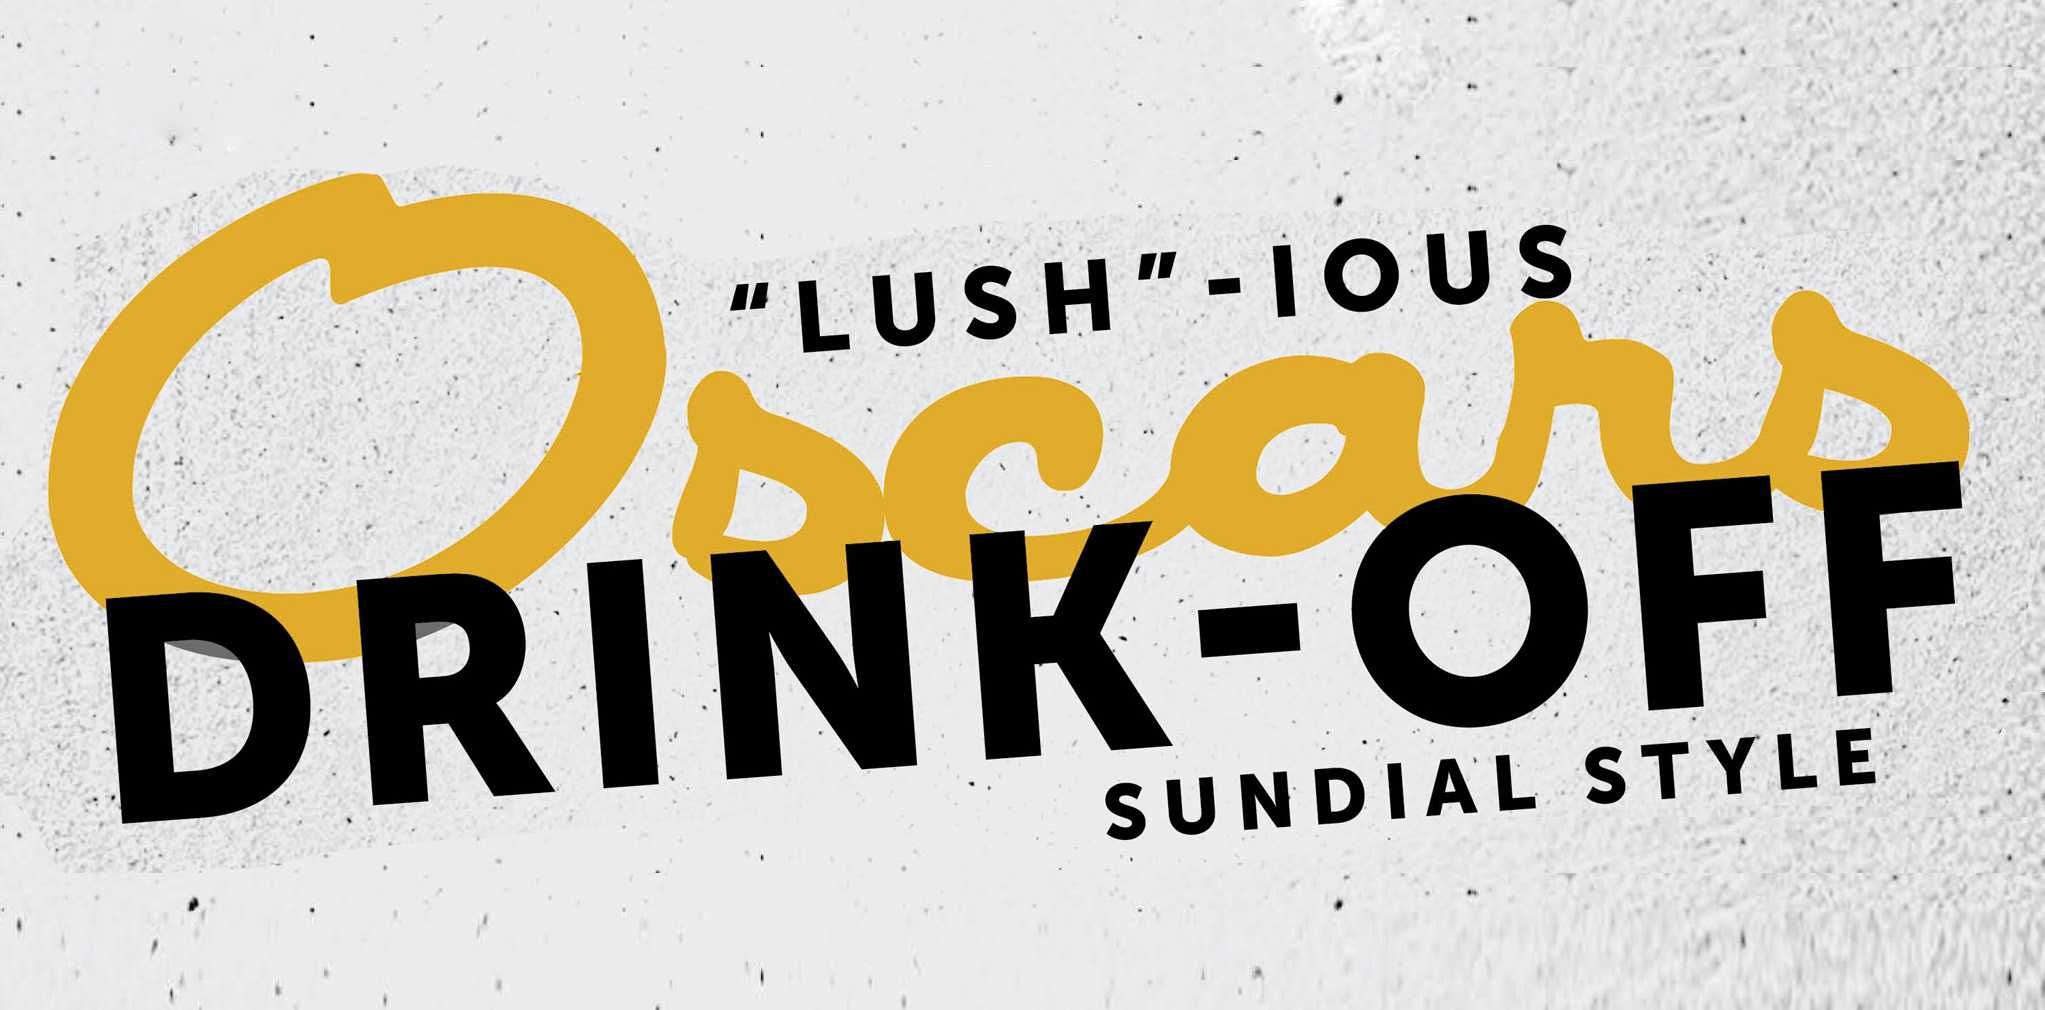 Play along on Sunday with the Sundial Oscars drinking game and ballot